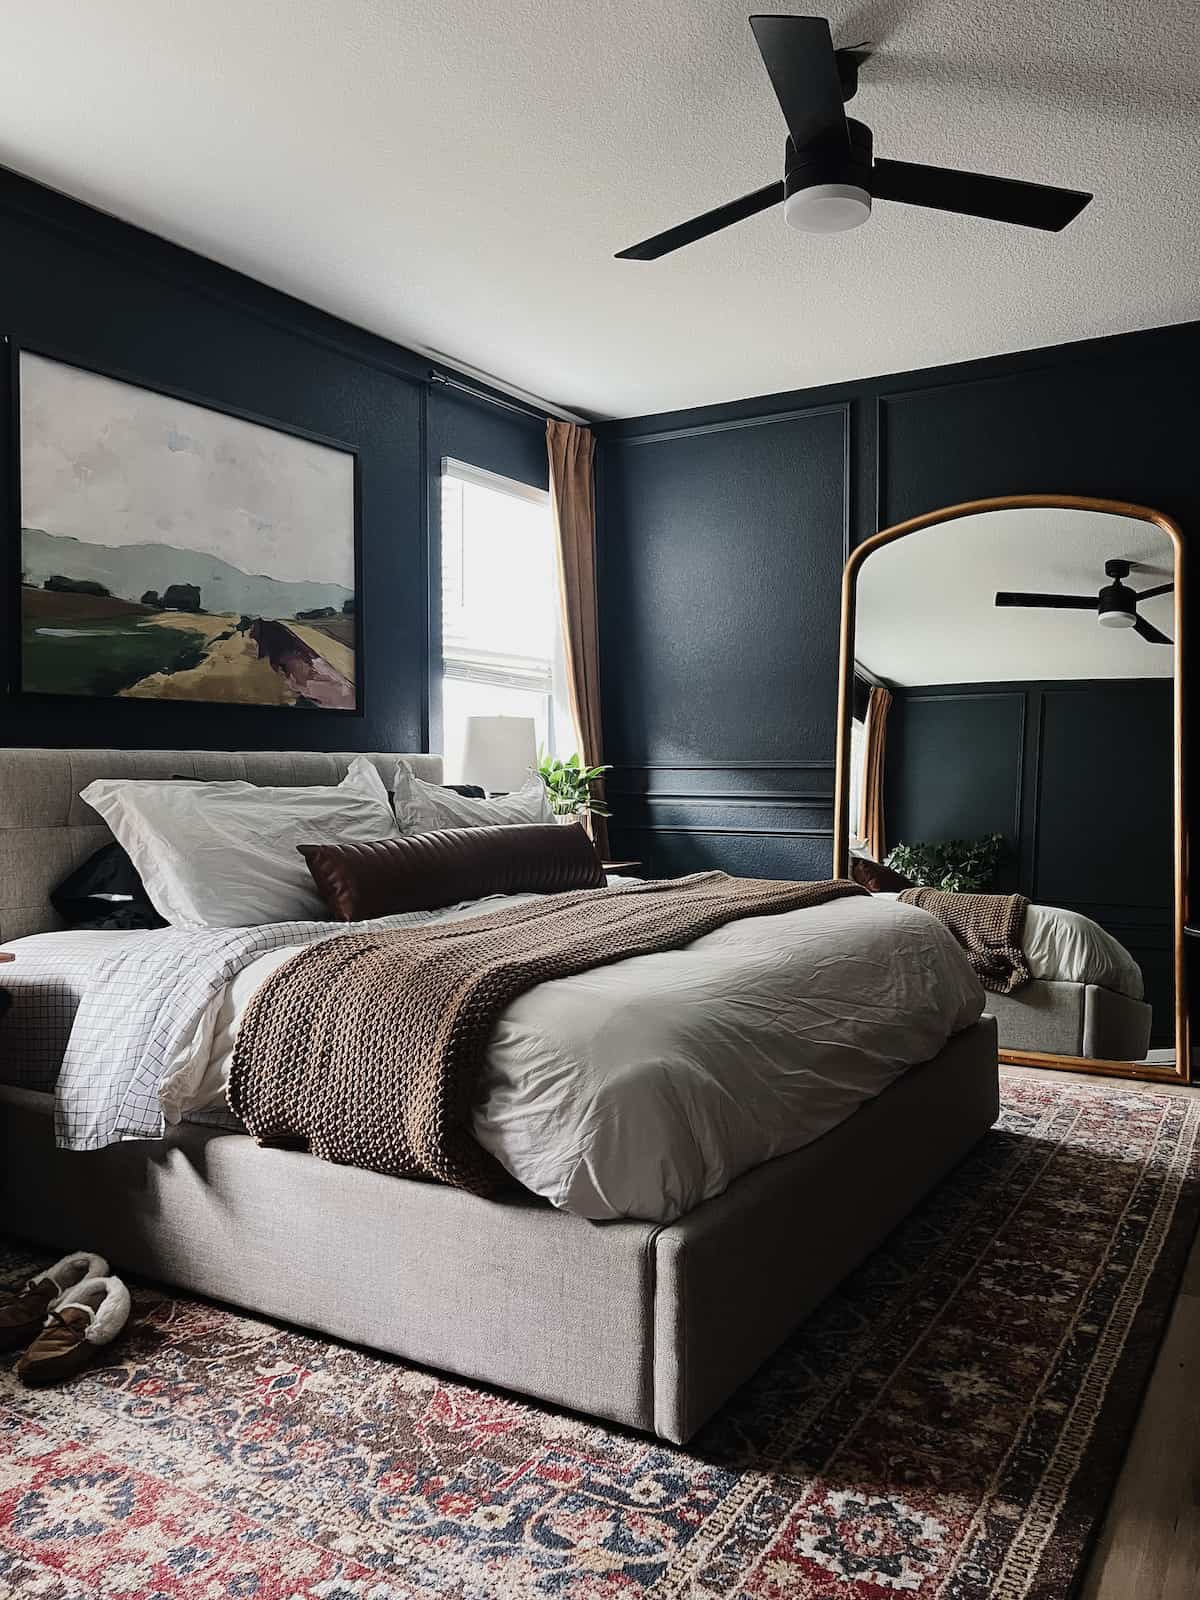 Dark and cozy bedroom with wall trim